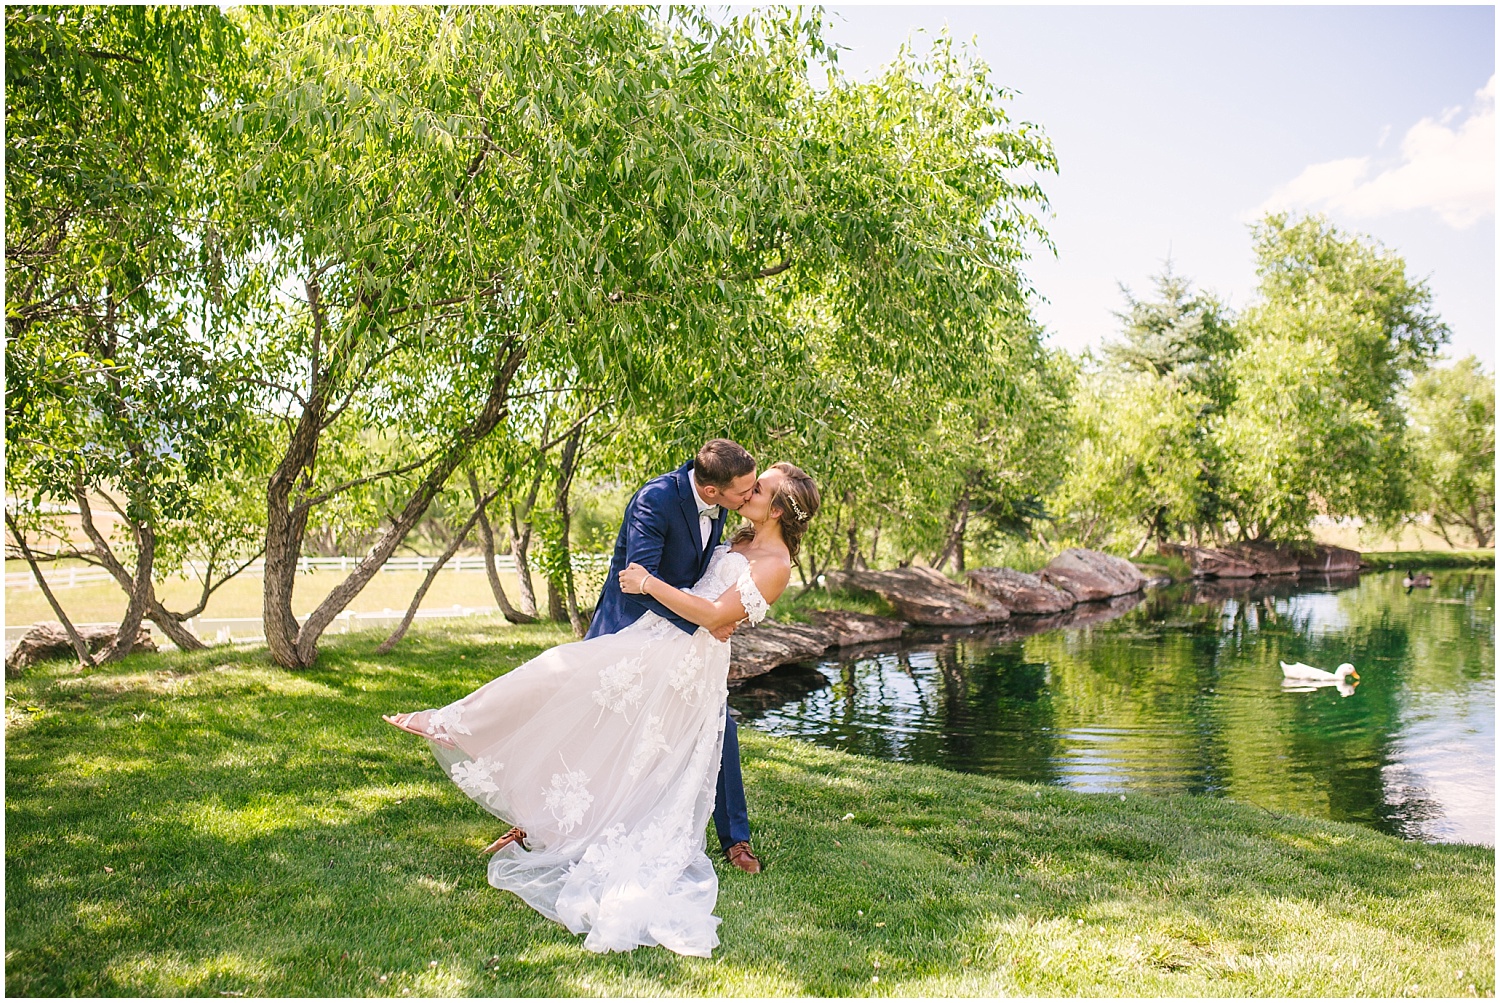 Bride and groom kissing by the trees and pond at Crooked Willow Farms wedding